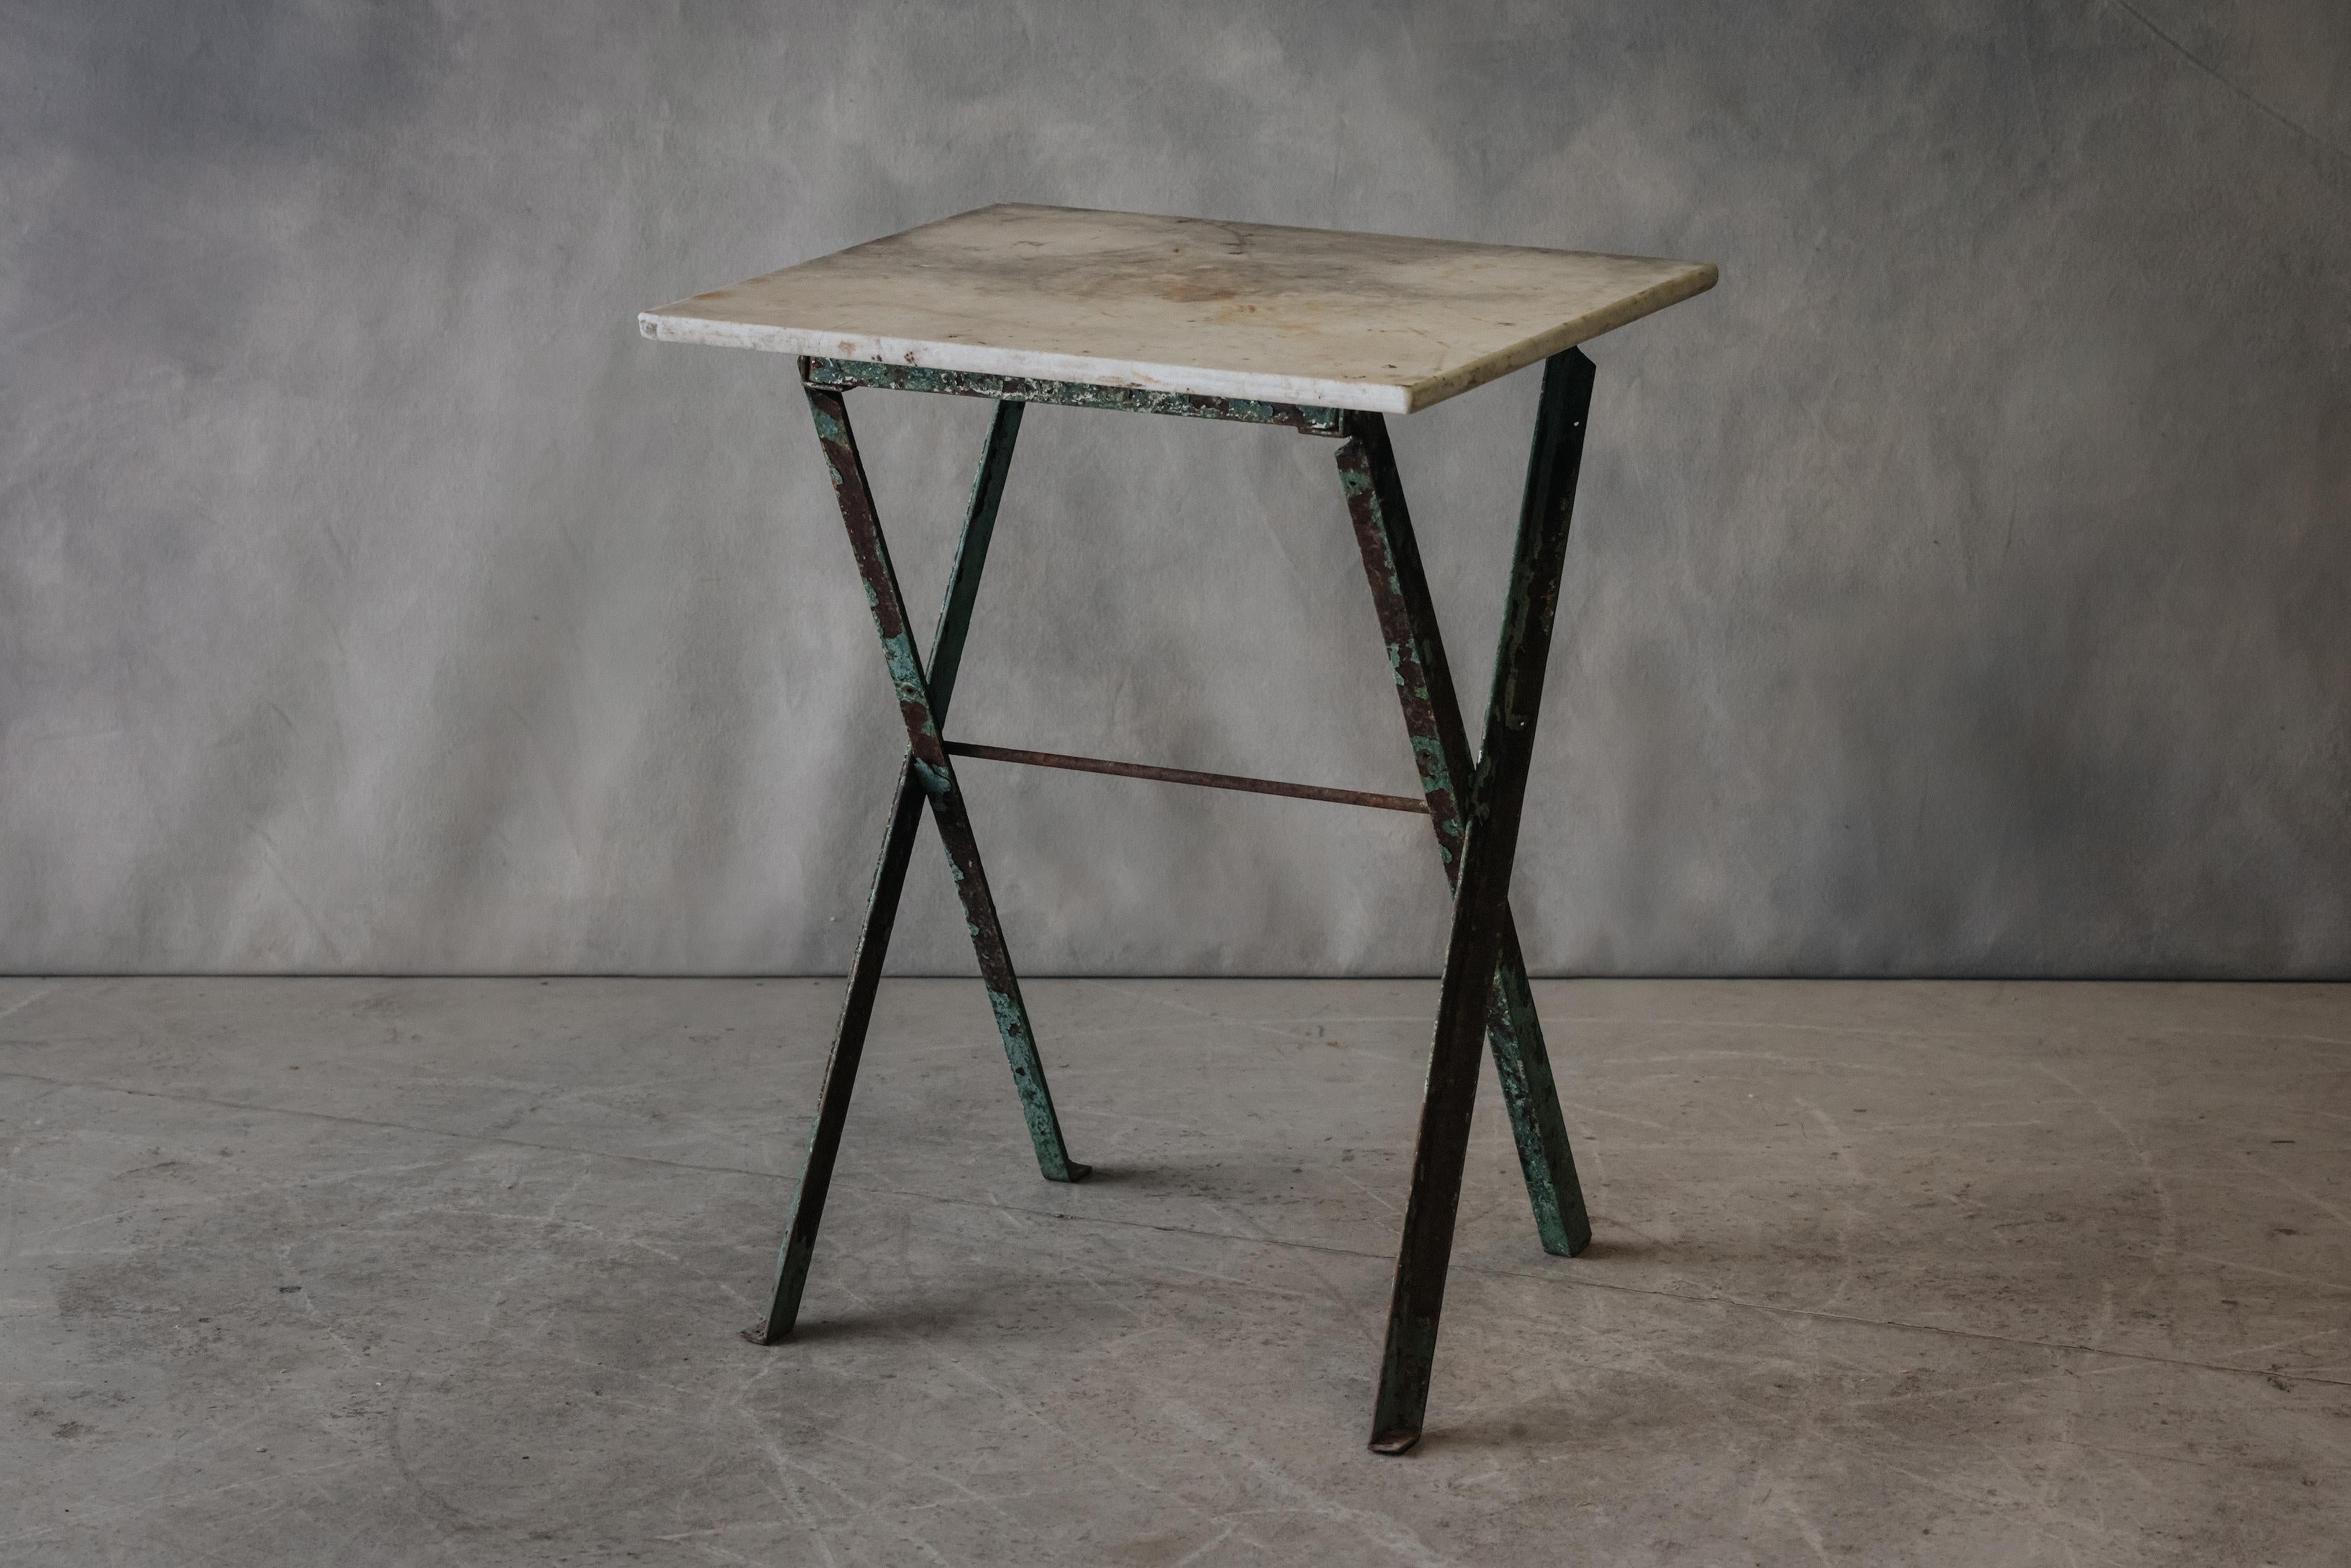 Vintage French Marble Bistro Table From France, Circa 1950.  Solid marble top on a steel base with great patina and wear.